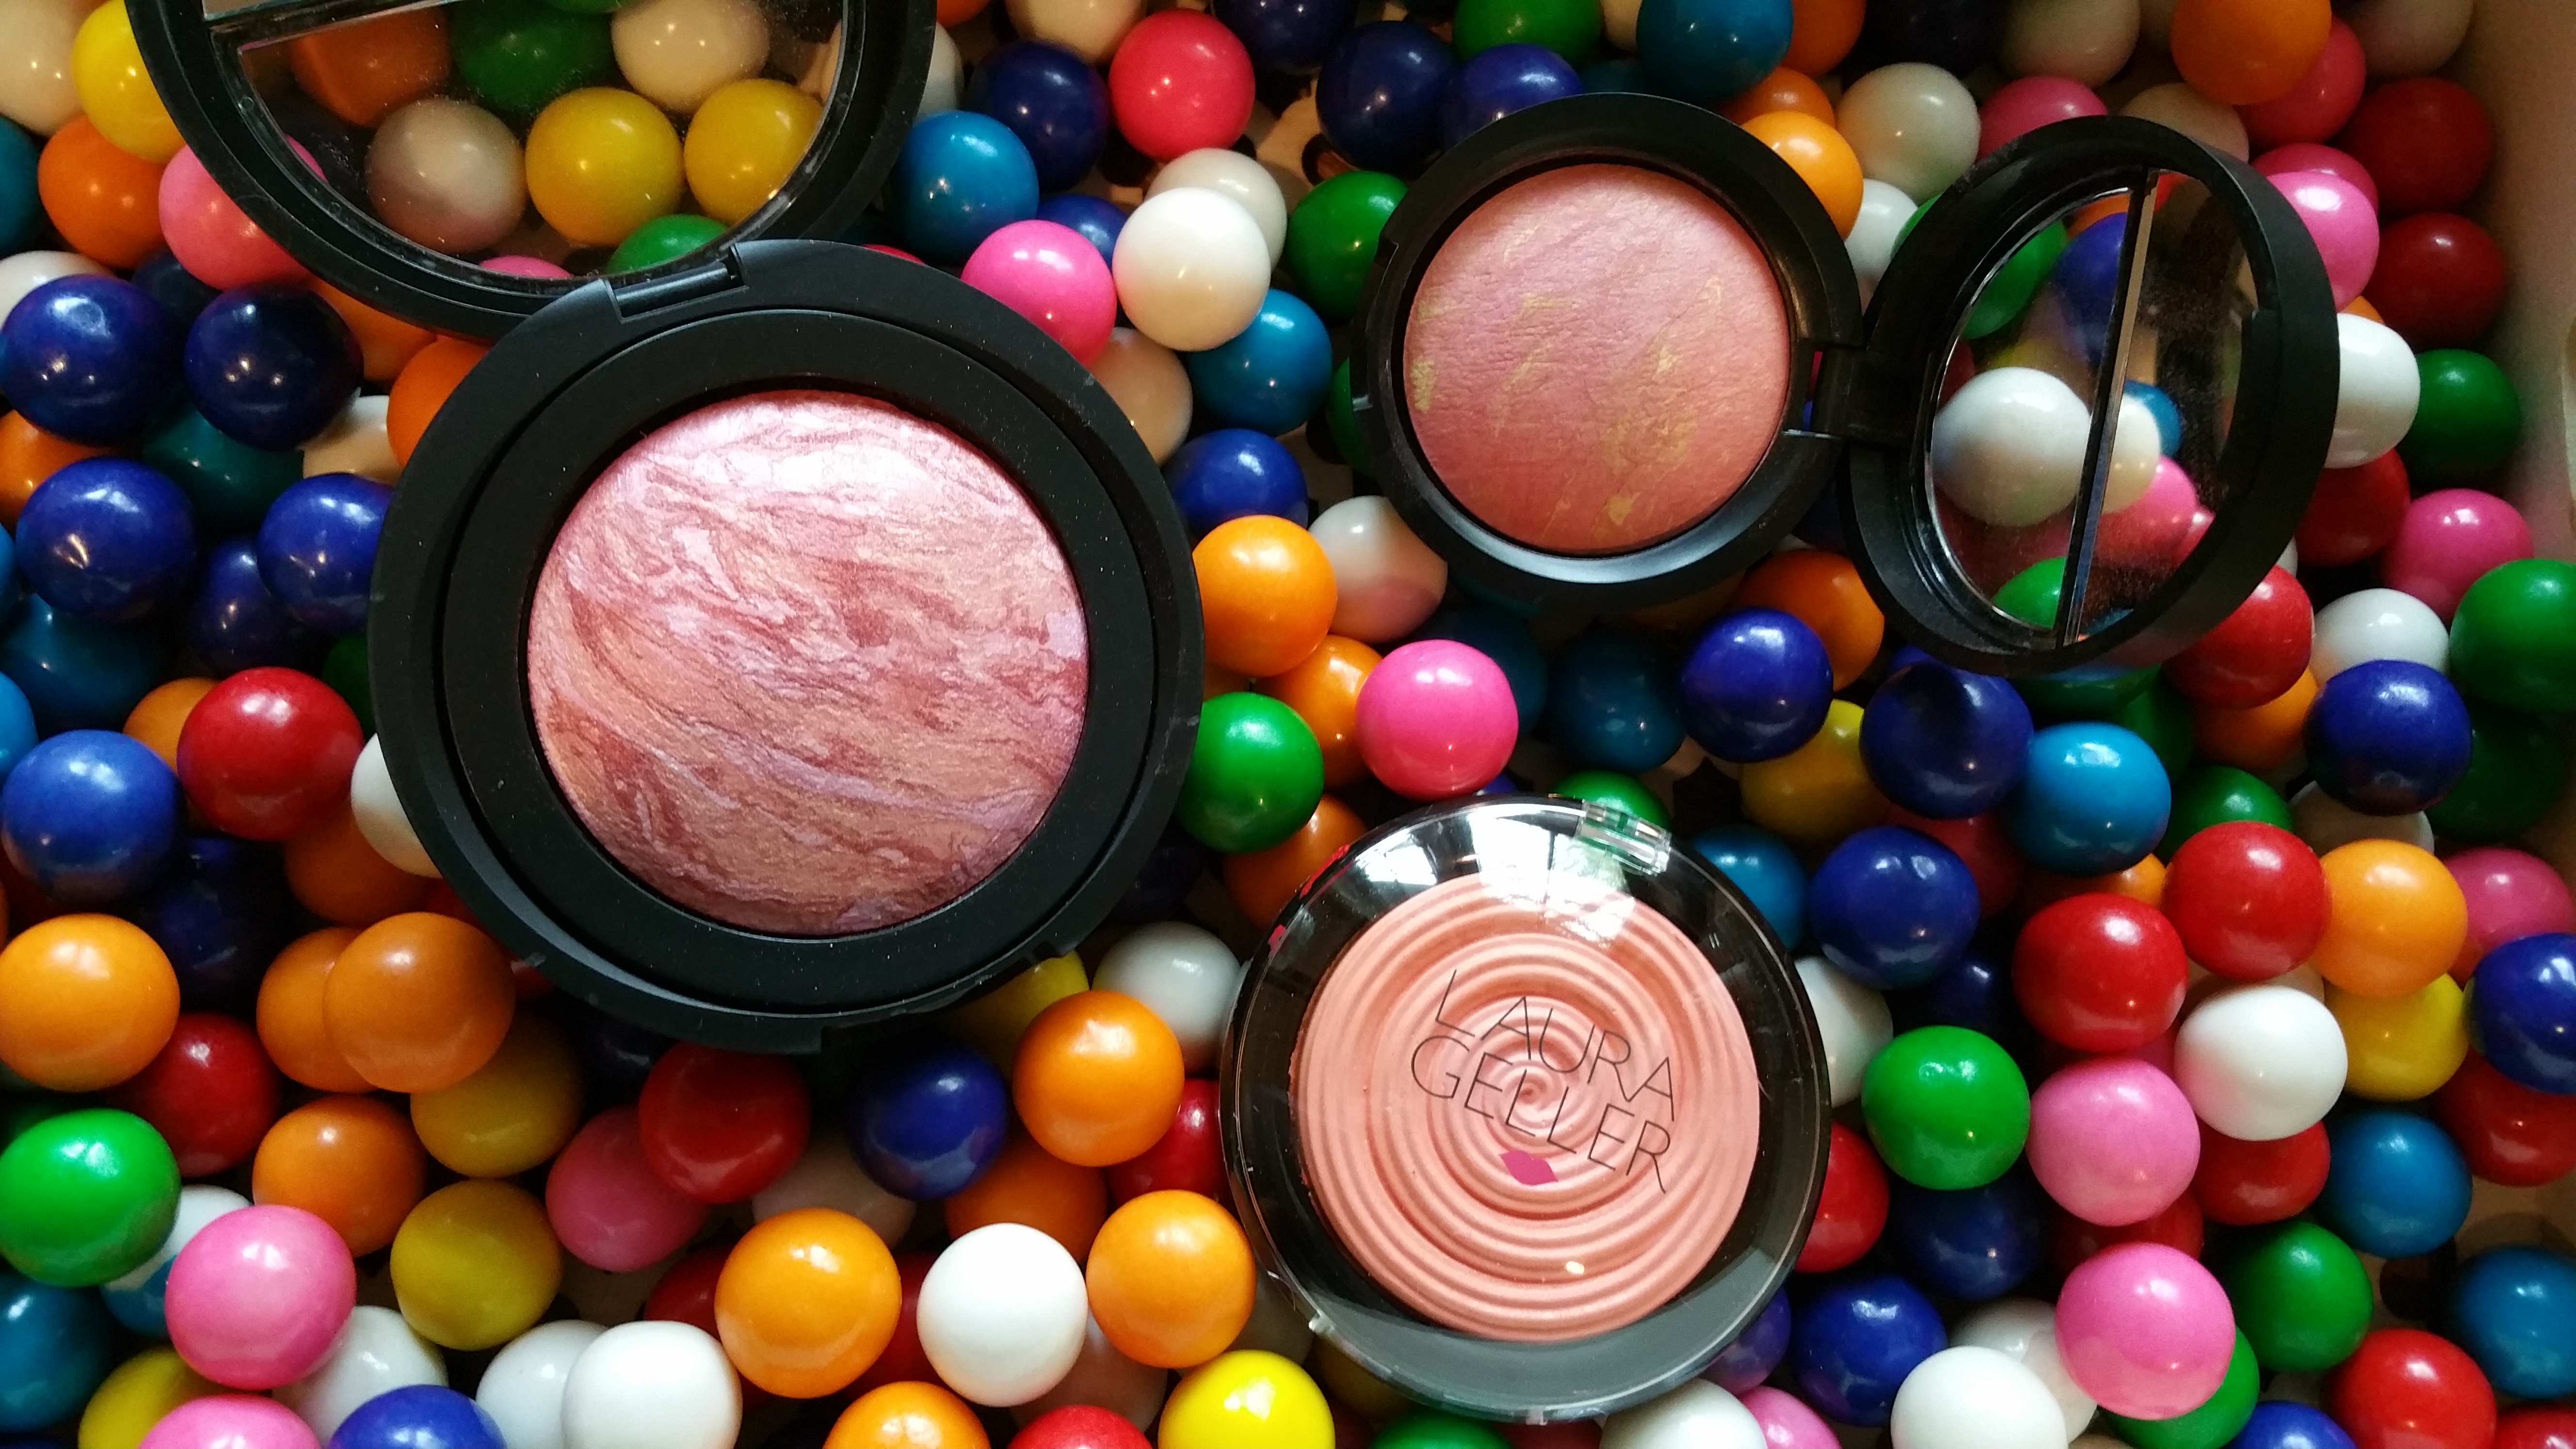 Clockwise from top left: Laura Geller Blush-N-Brighten in Tropic Hues, and Dreamsicle, and Baked Gelato Vivid Swirl Blush in Cantaloupe